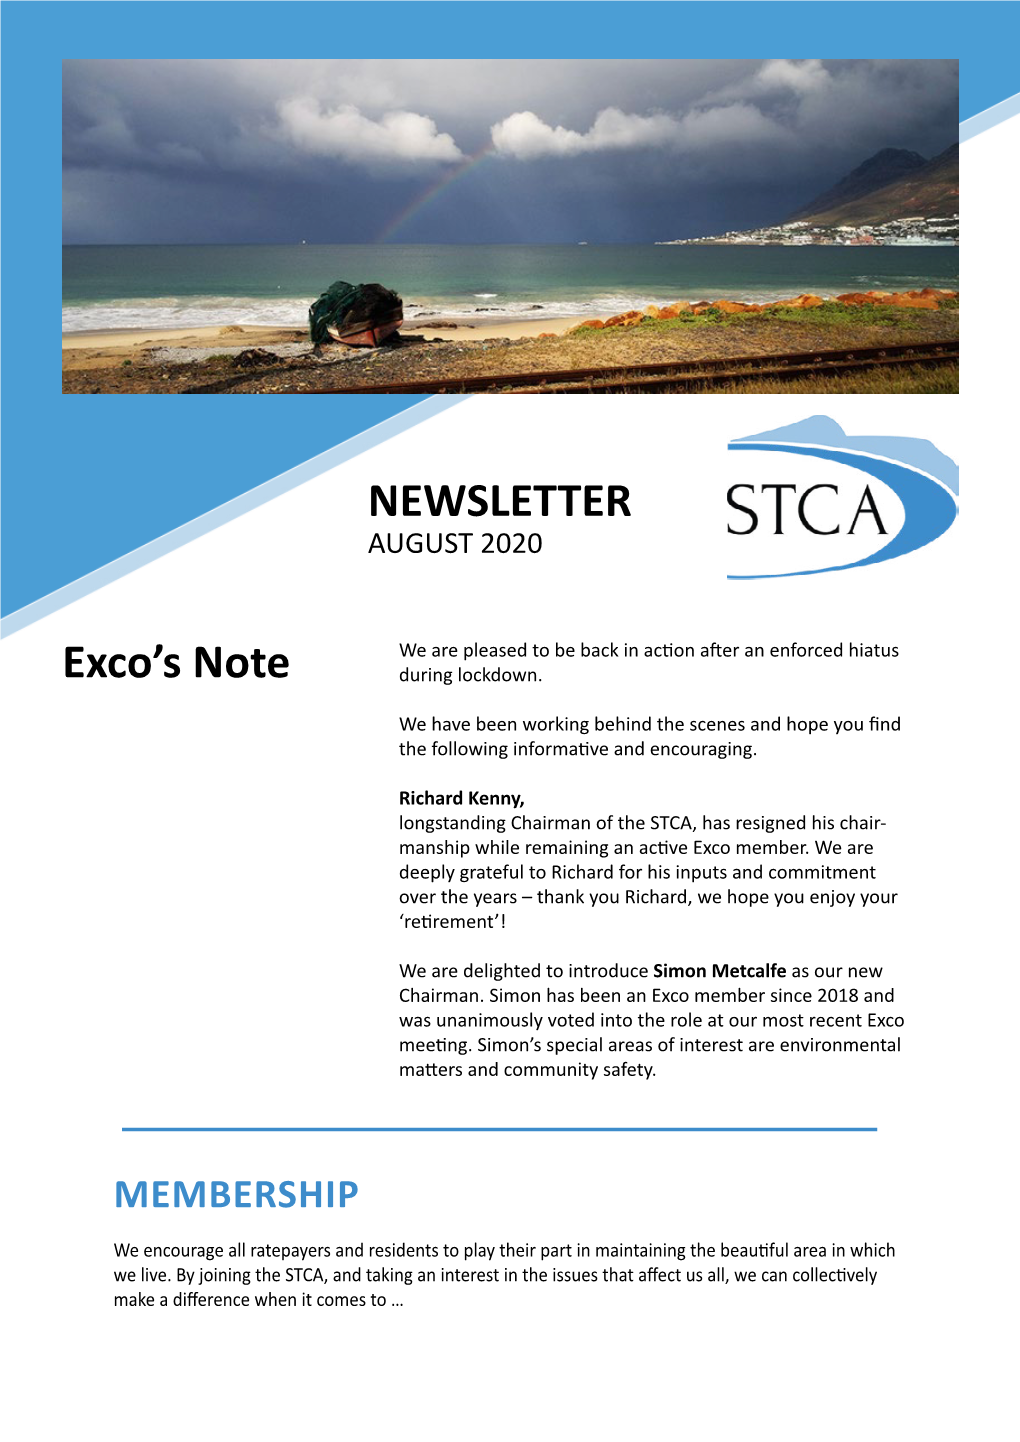 NEWSLETTER Exco's Note